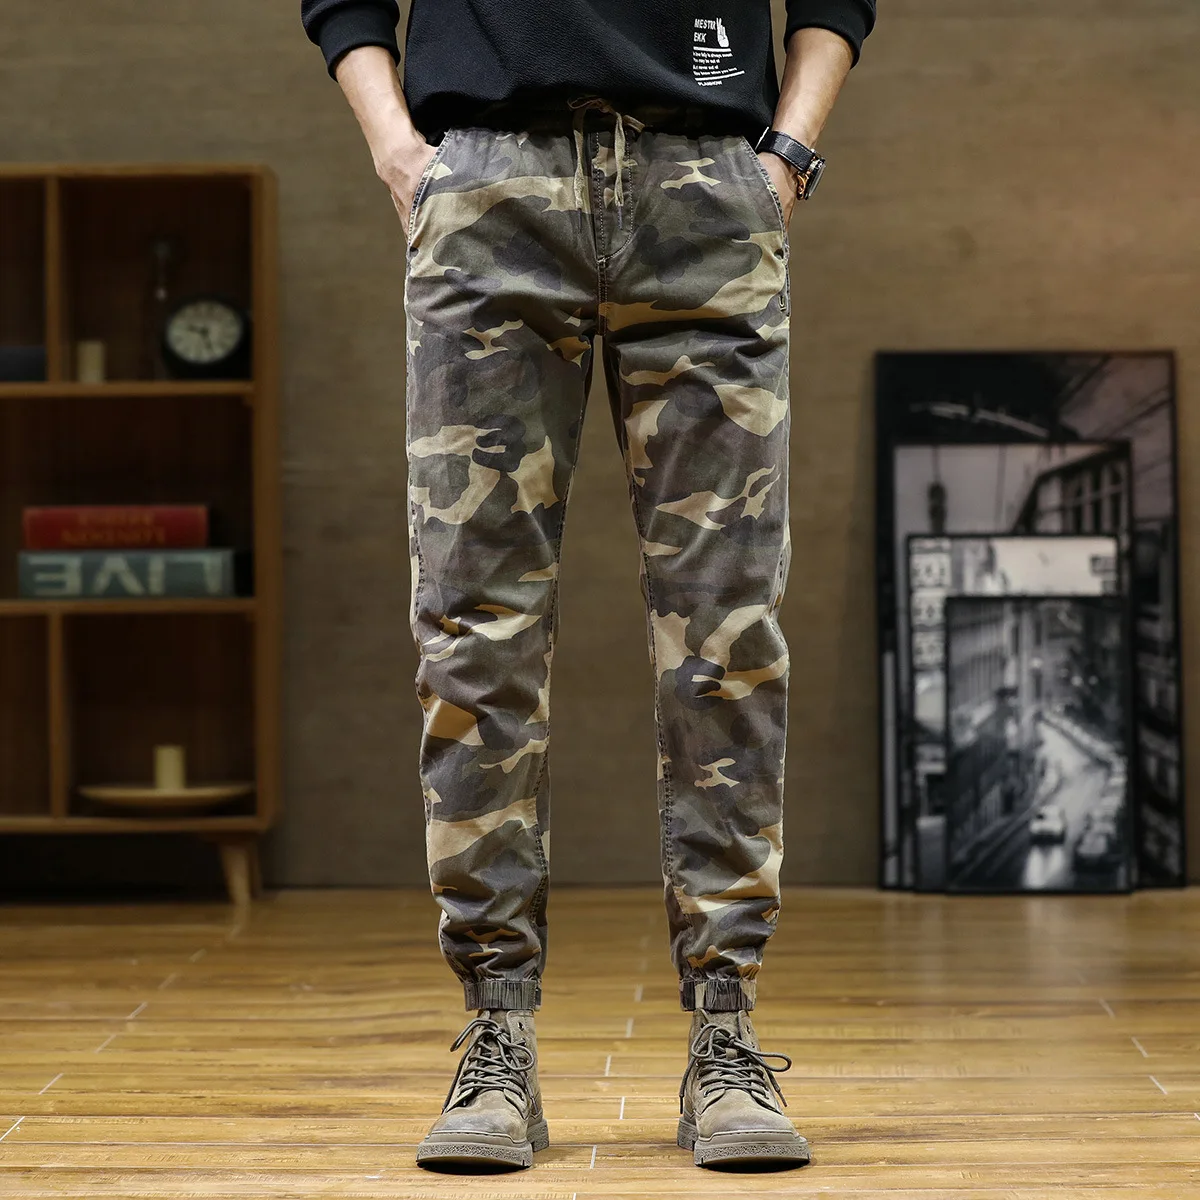 Elmsk Men's Spring/Summer Thin Workwear Pants Youth Fashion Camo Pants Large Loose Comfortable Drawstring High Waist Pants elmsk men s spring summer thin workwear pants japanese fashion brand loose personalized spliced elastic casual pants simple and